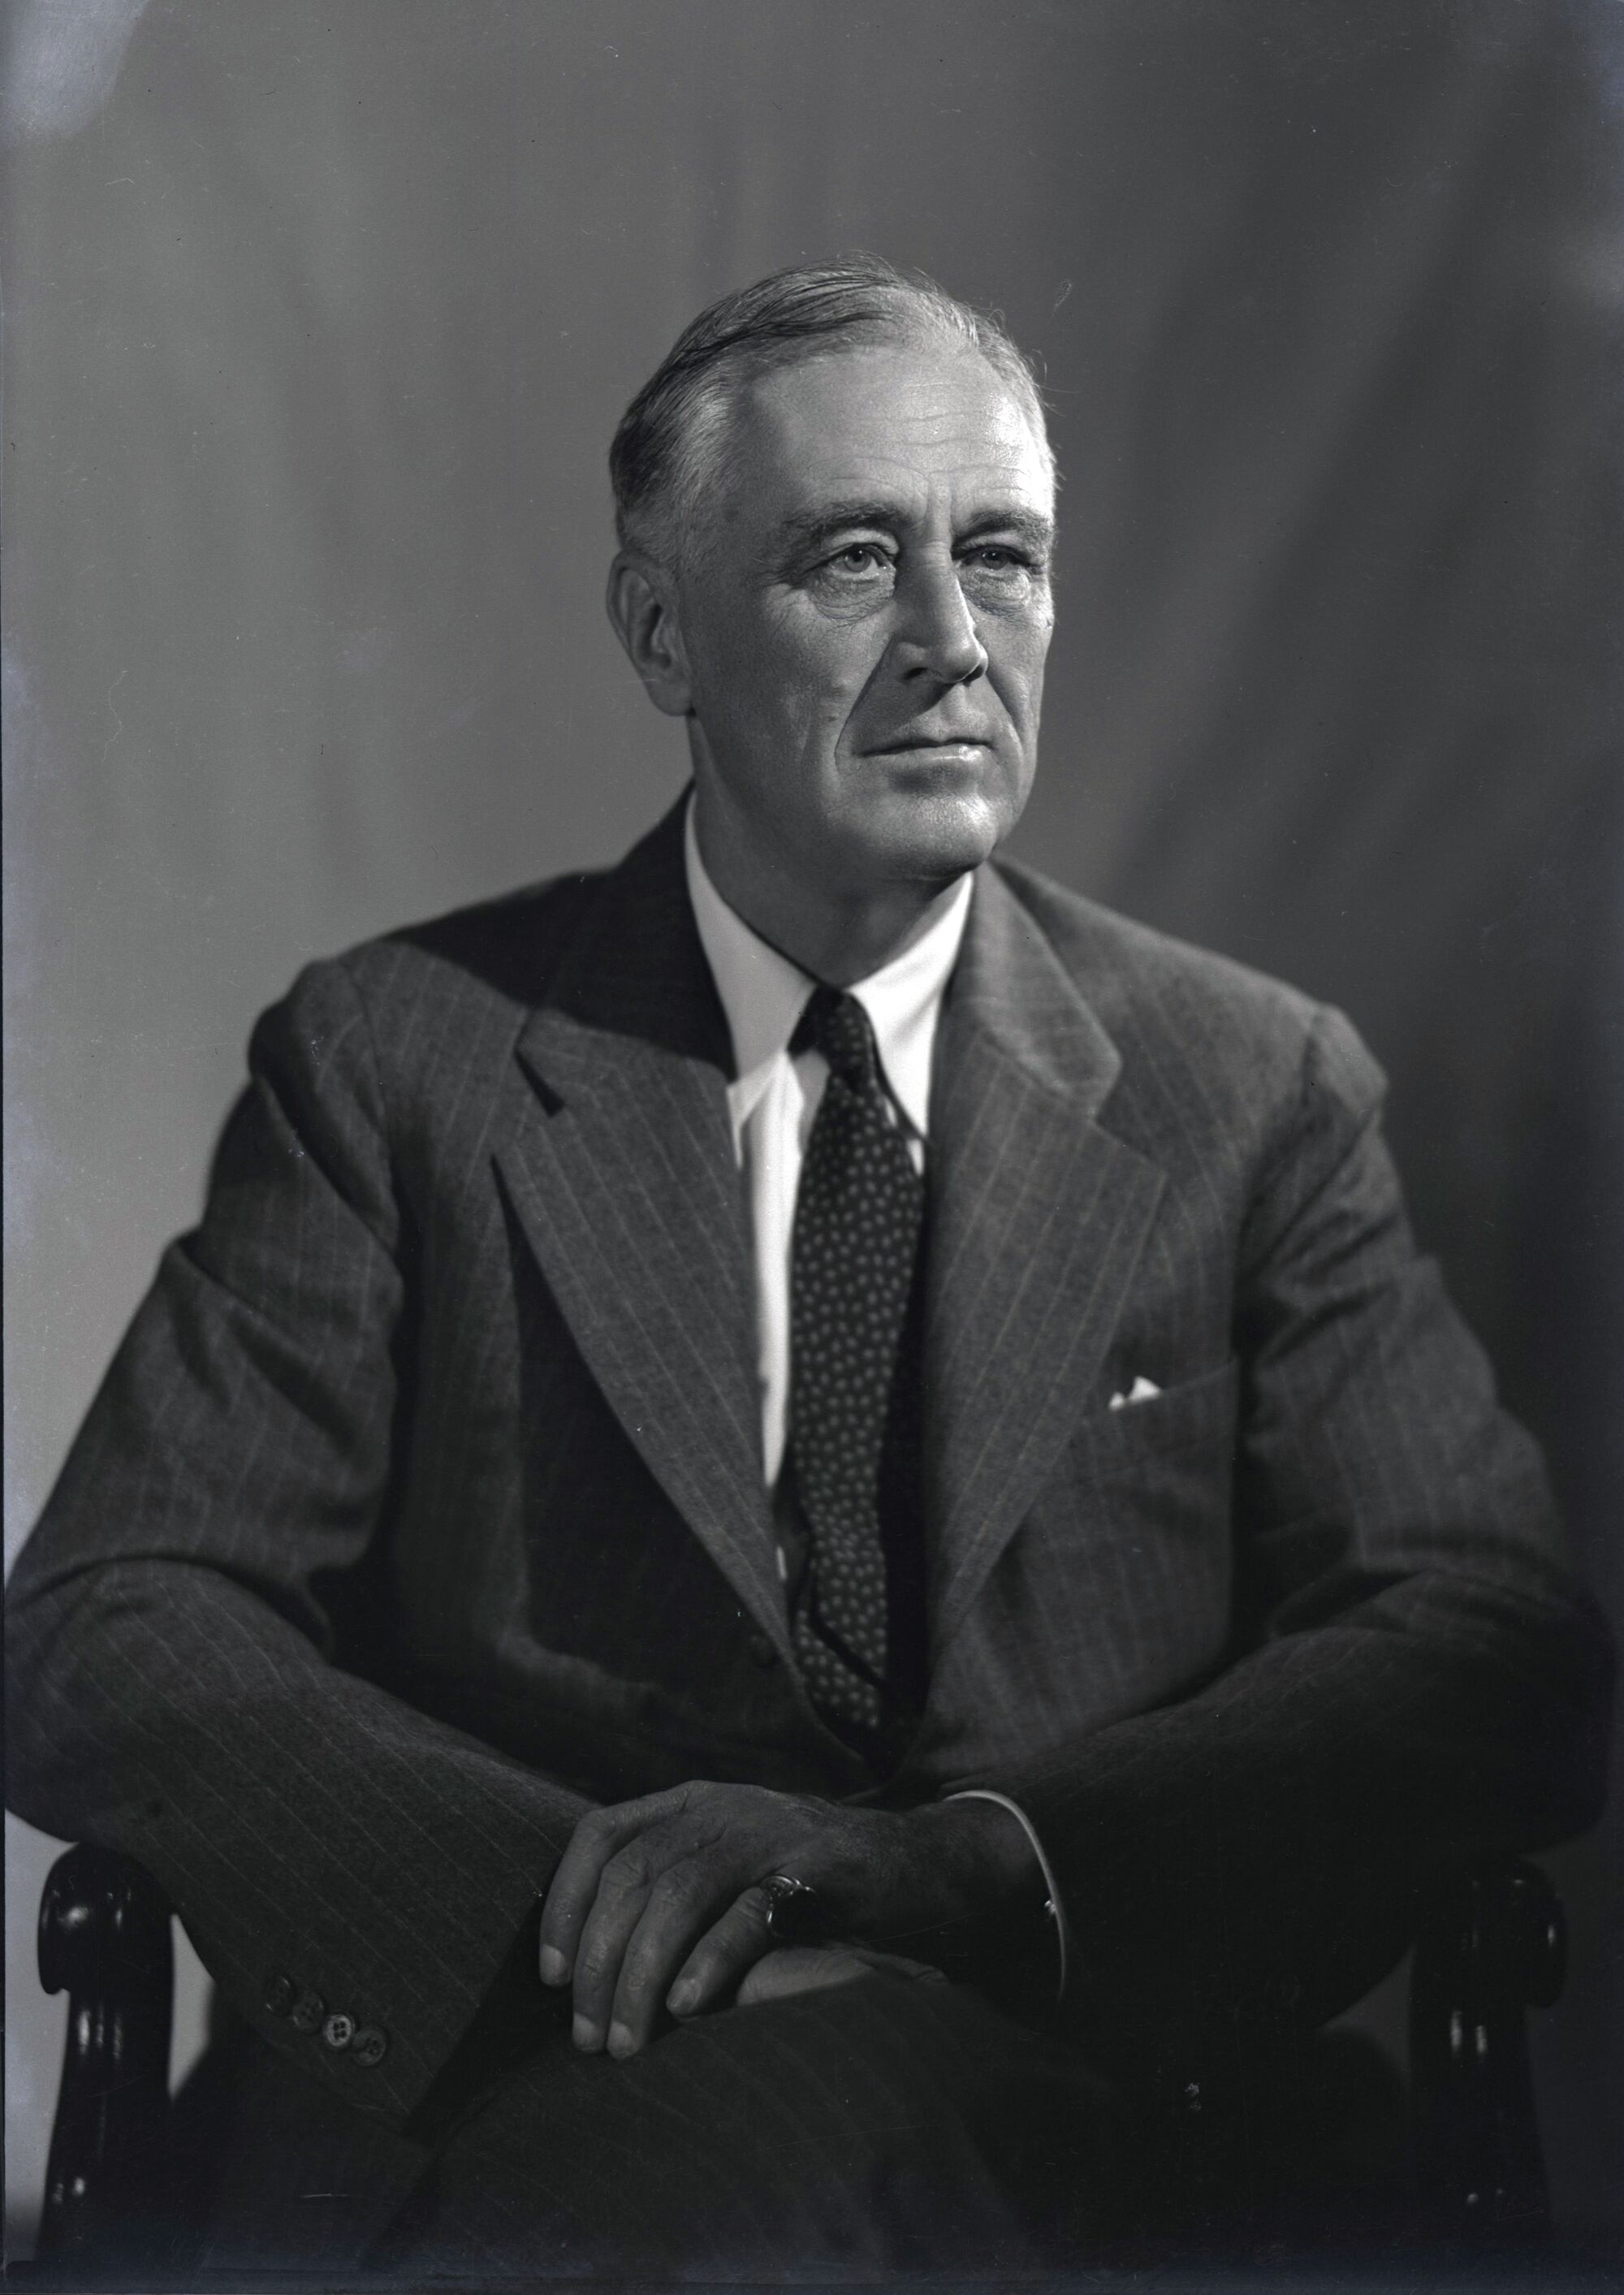 What was the New Deal? Franklin Roosevelt's US economic reforms ...